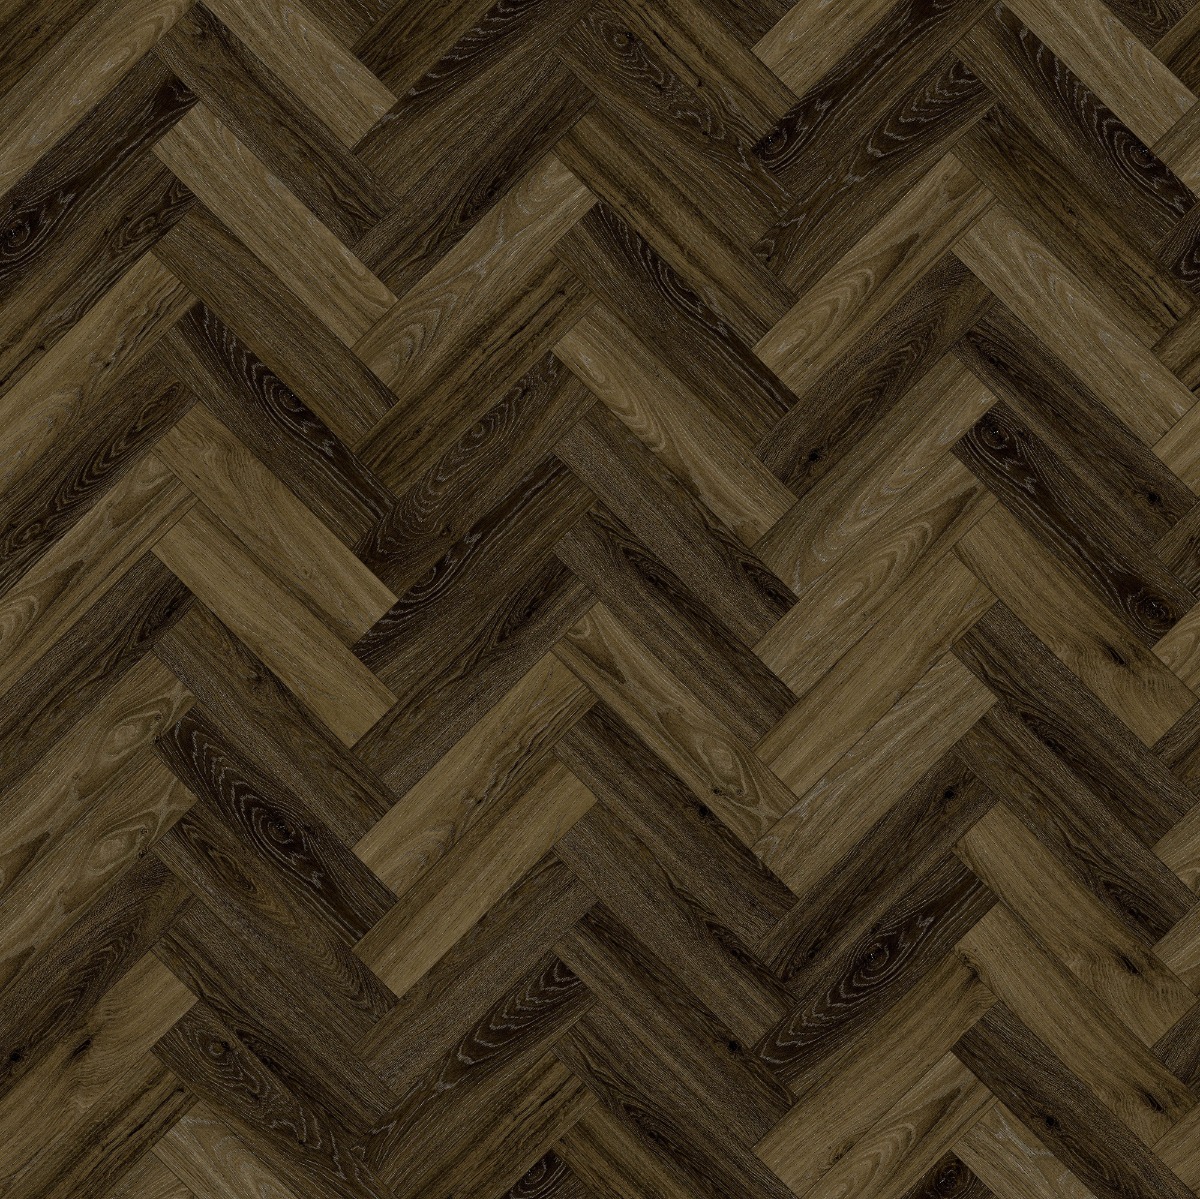 A seamless vinyl texture with vero catania  units arranged in a Herringbone pattern